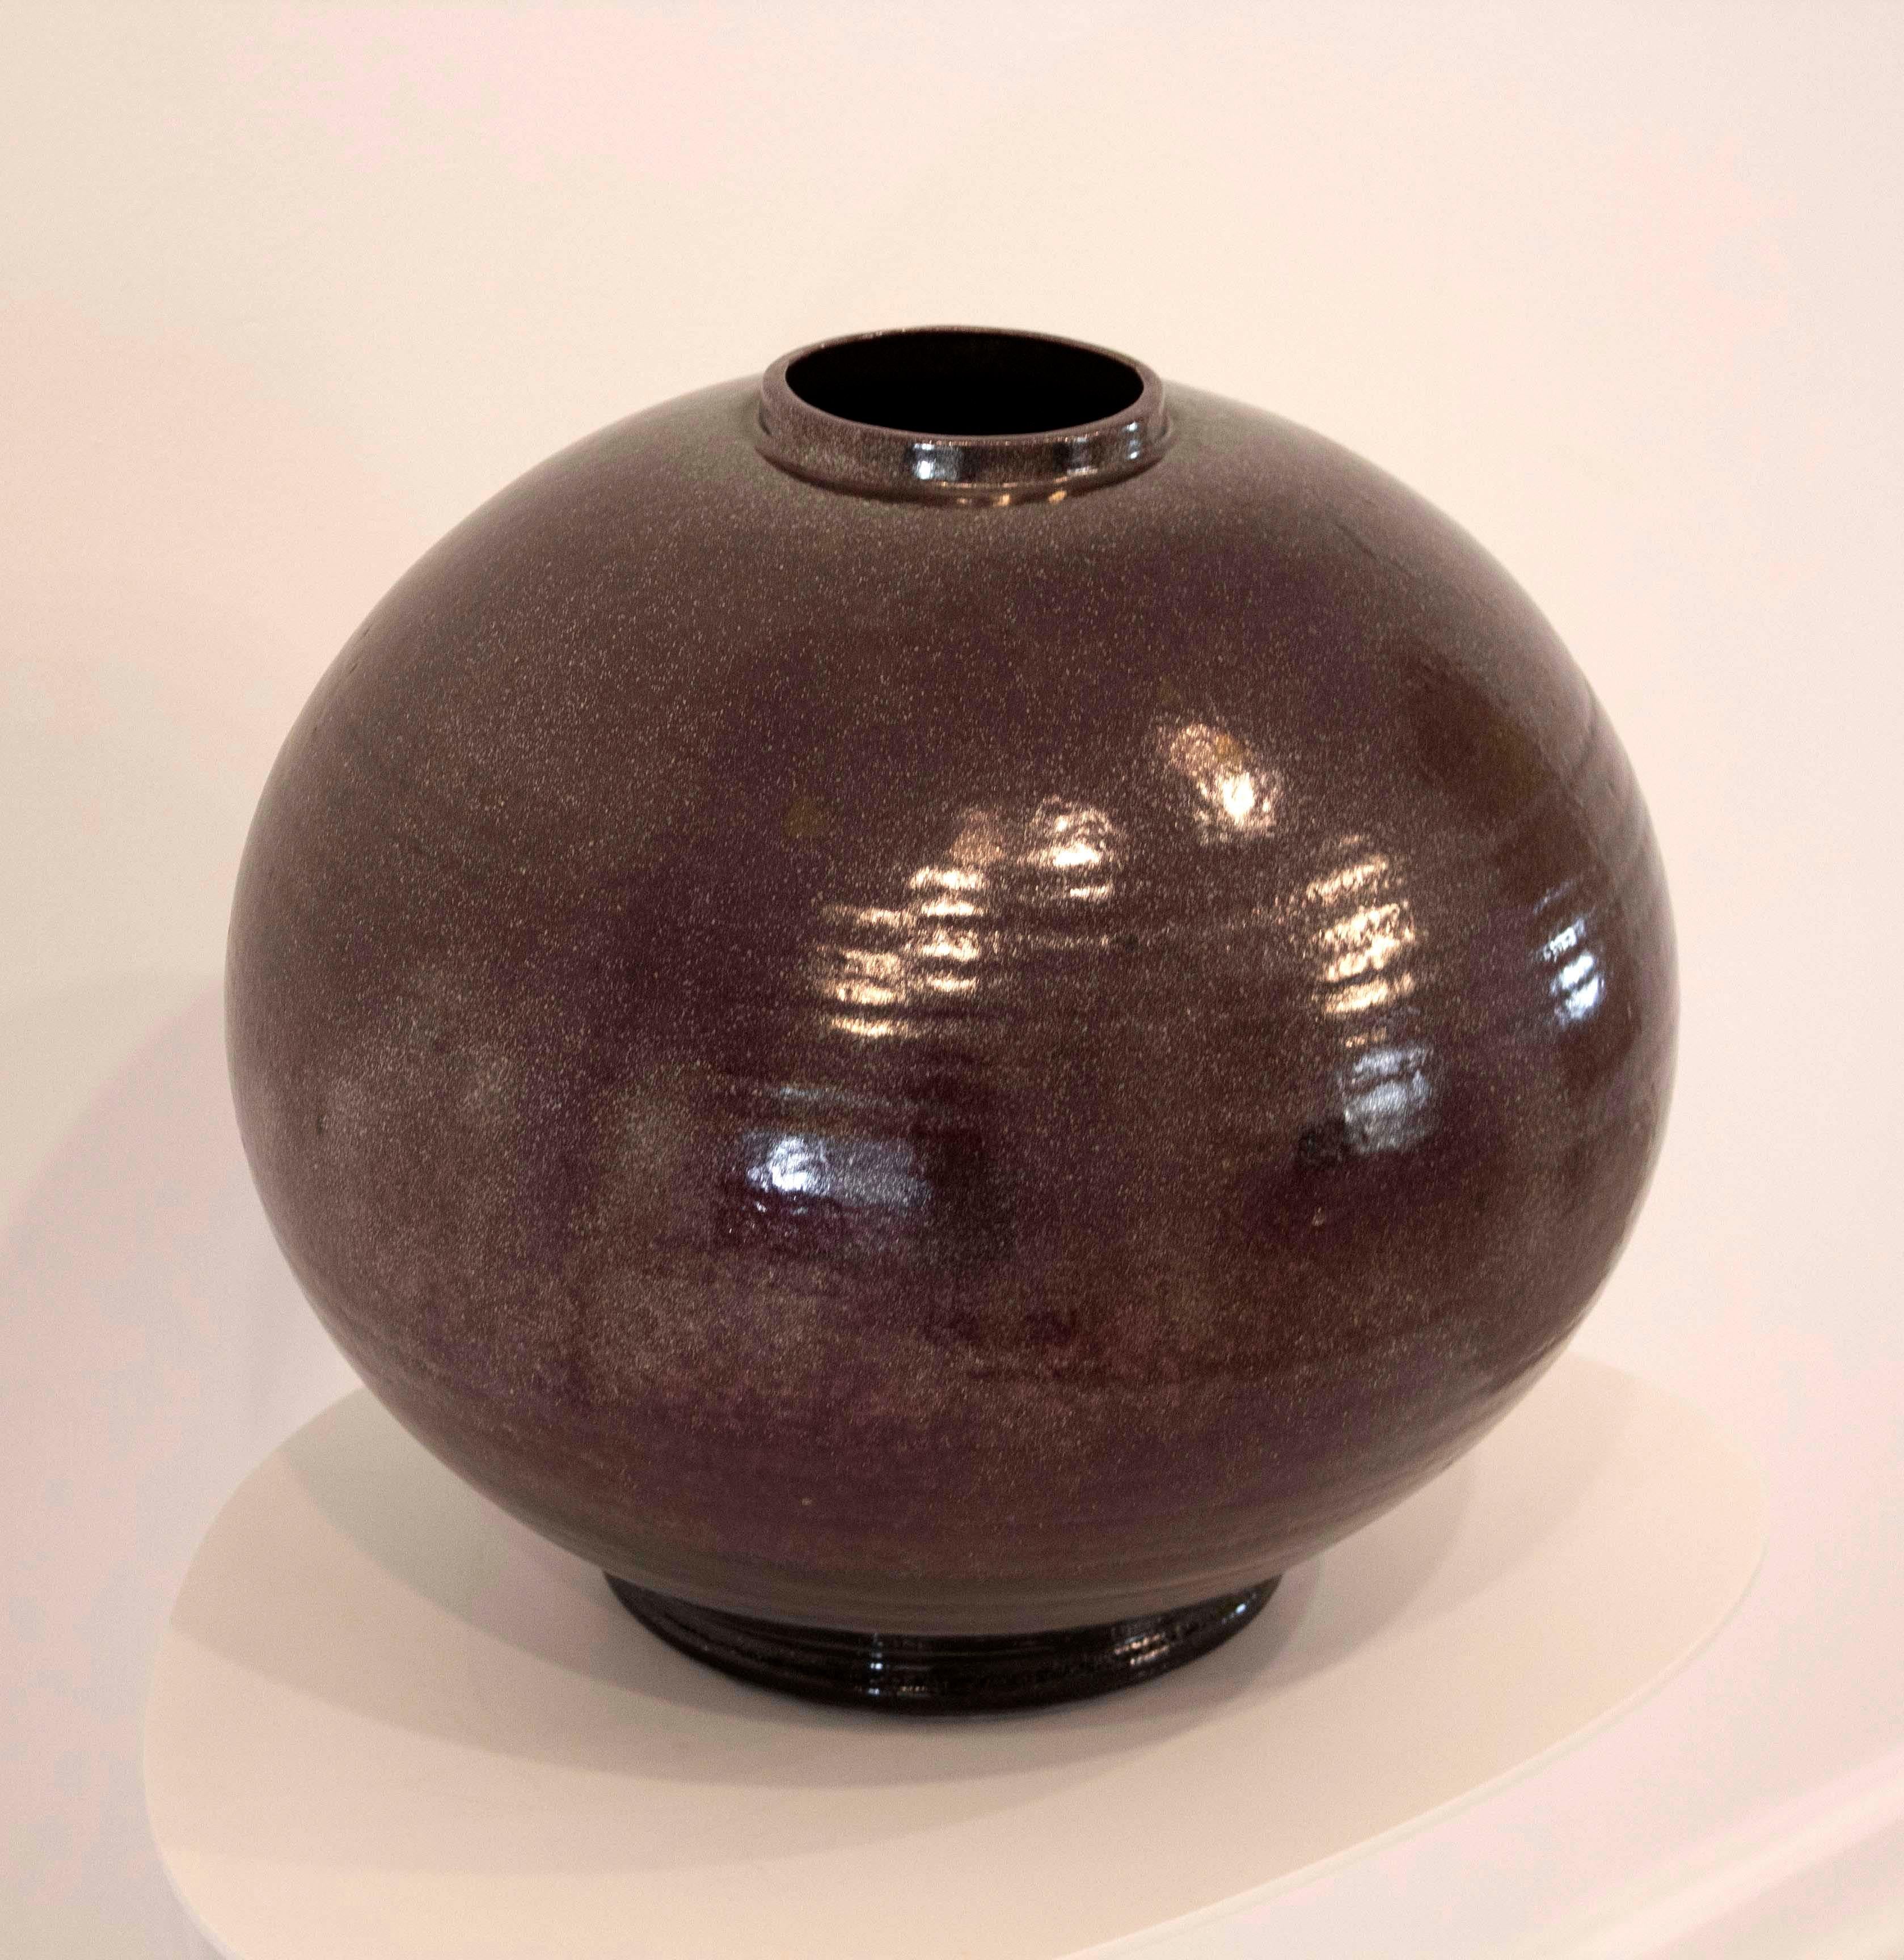 This lovely, hand-thrown cylindrical pottery vase is glazed in a purple hue and is signed 'Gary McCloy Los Angeles' on the bottom. In very good condition. Dimensions: 15